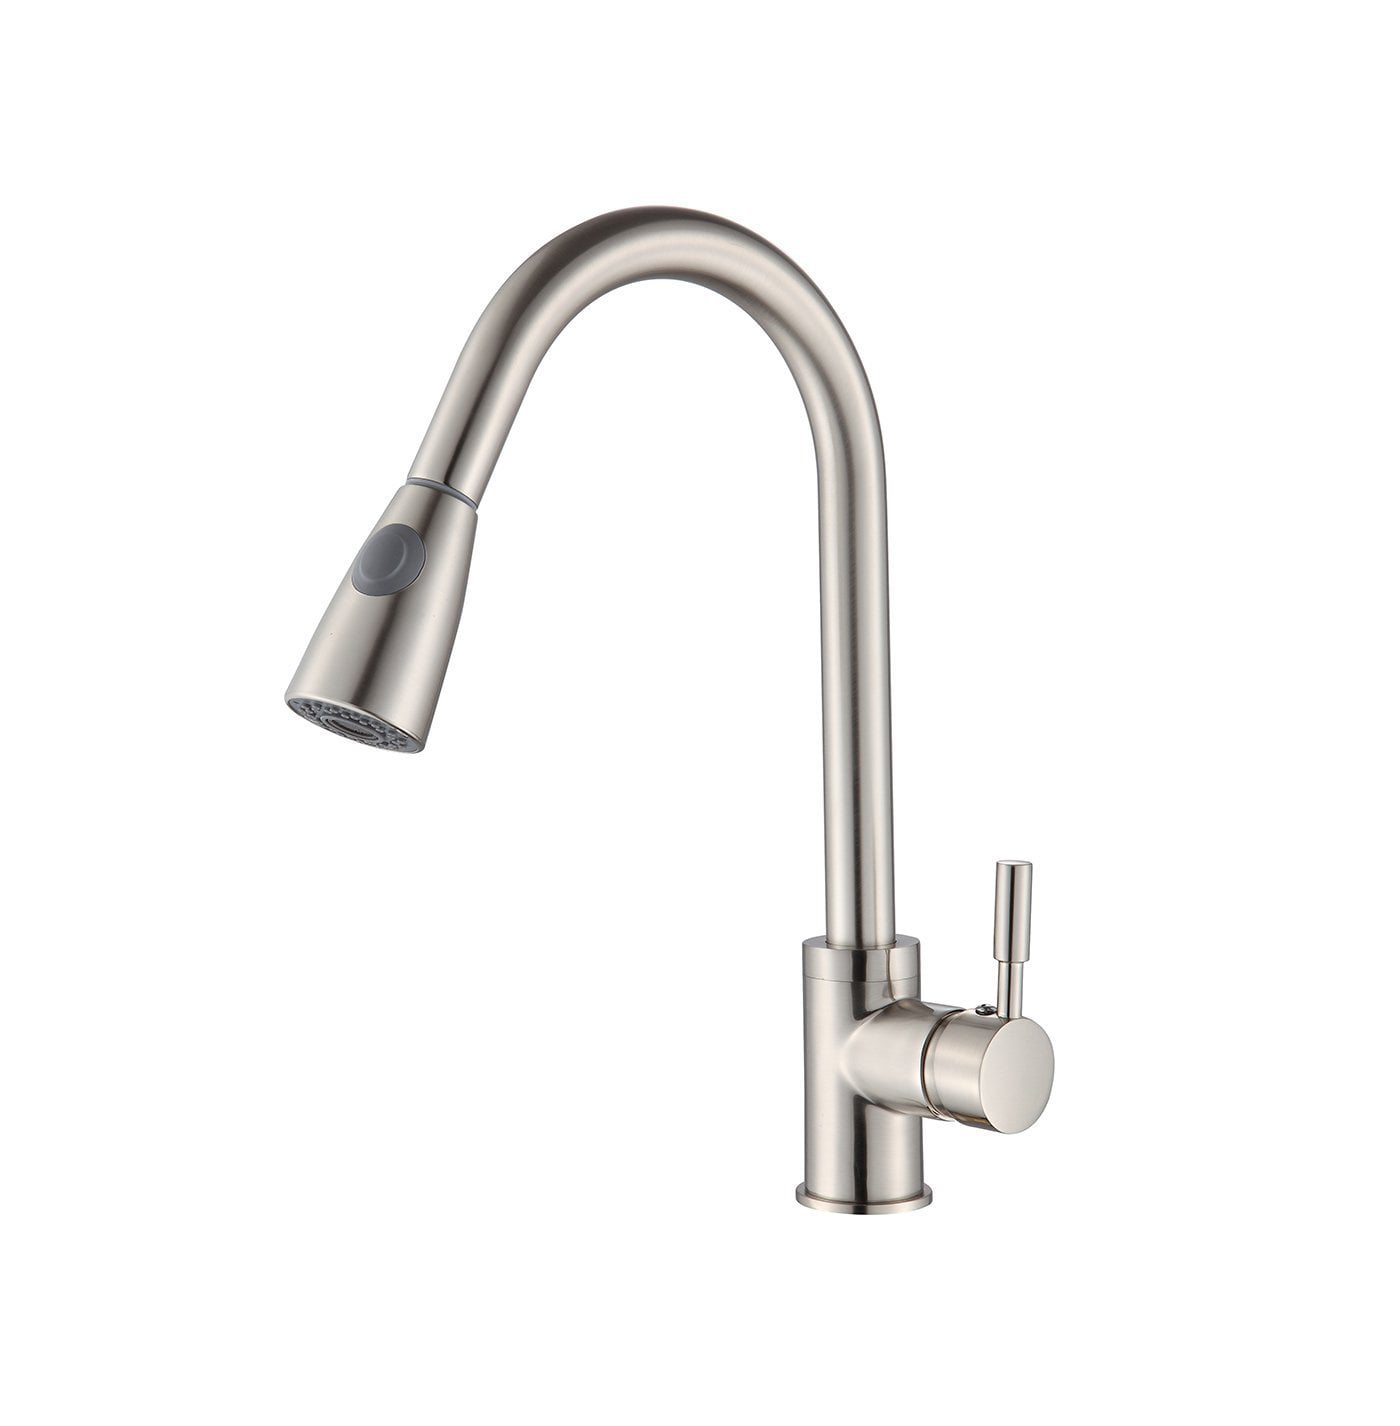 Kitchen Faucet Pull Out Sprayer Head Sink Mixer Tap Single Handle Brushed Nickel